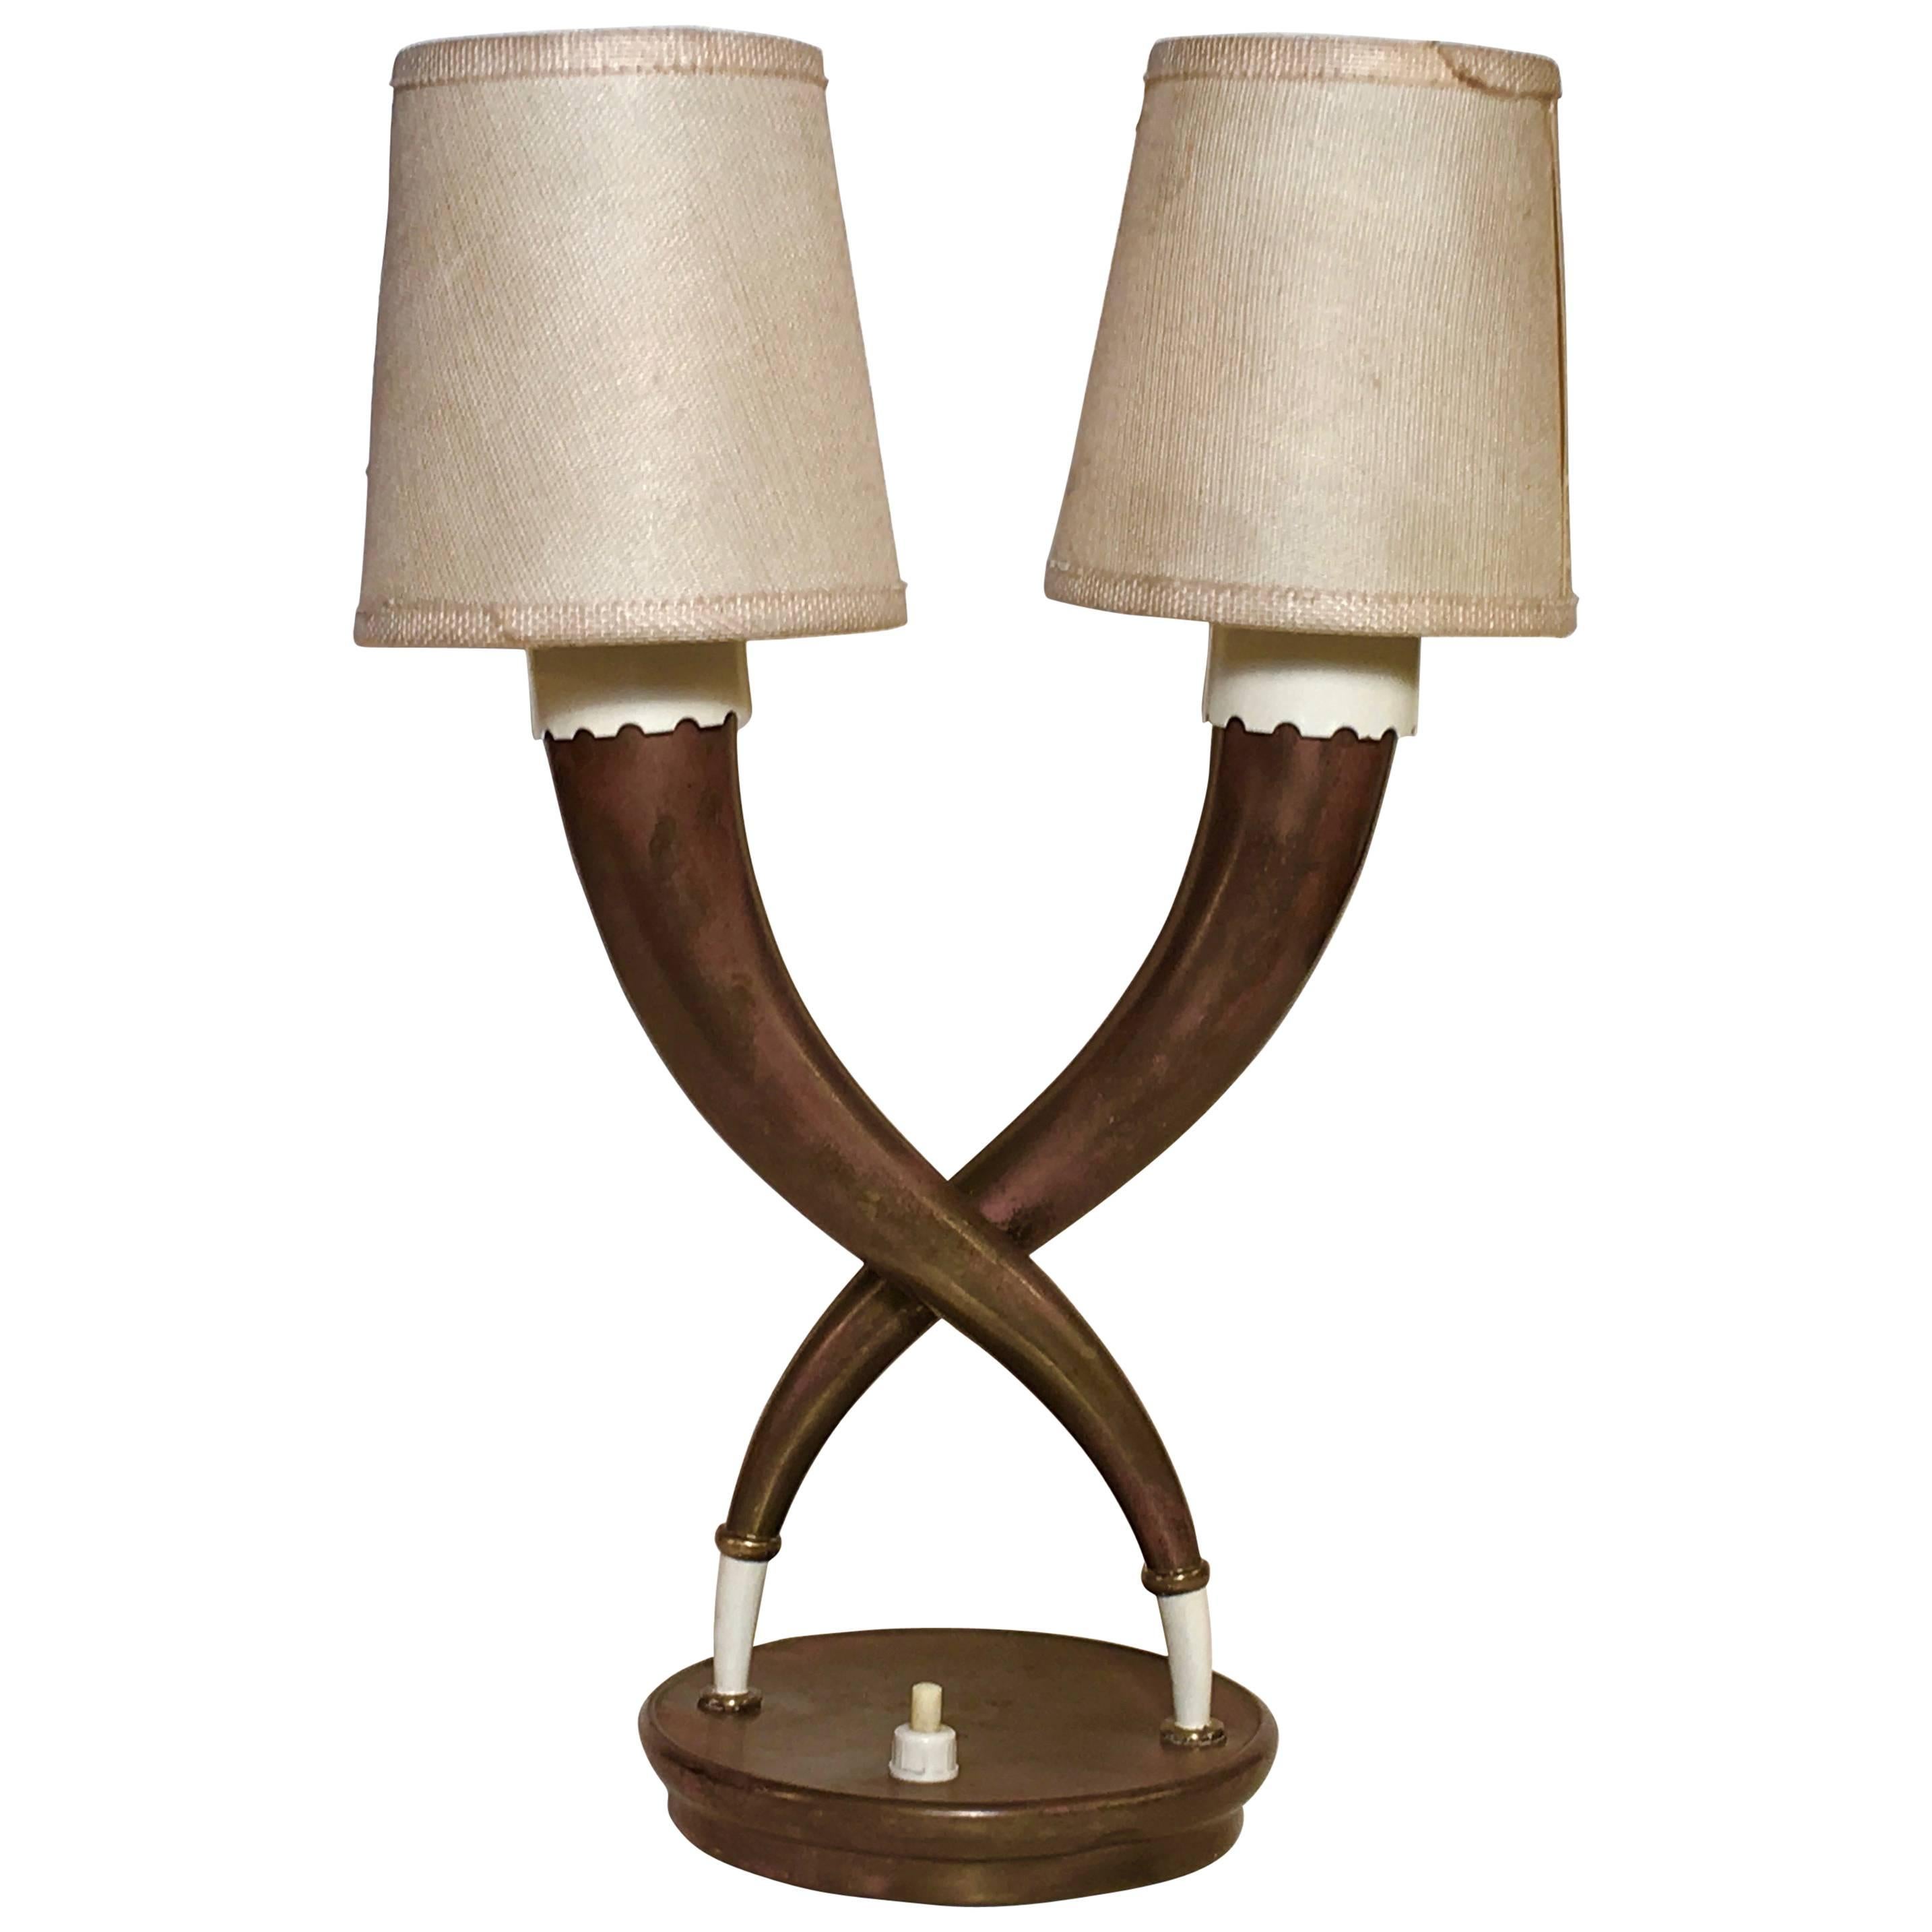 Art Deco Table Lamp Attributed to Gio Ponti For Sale